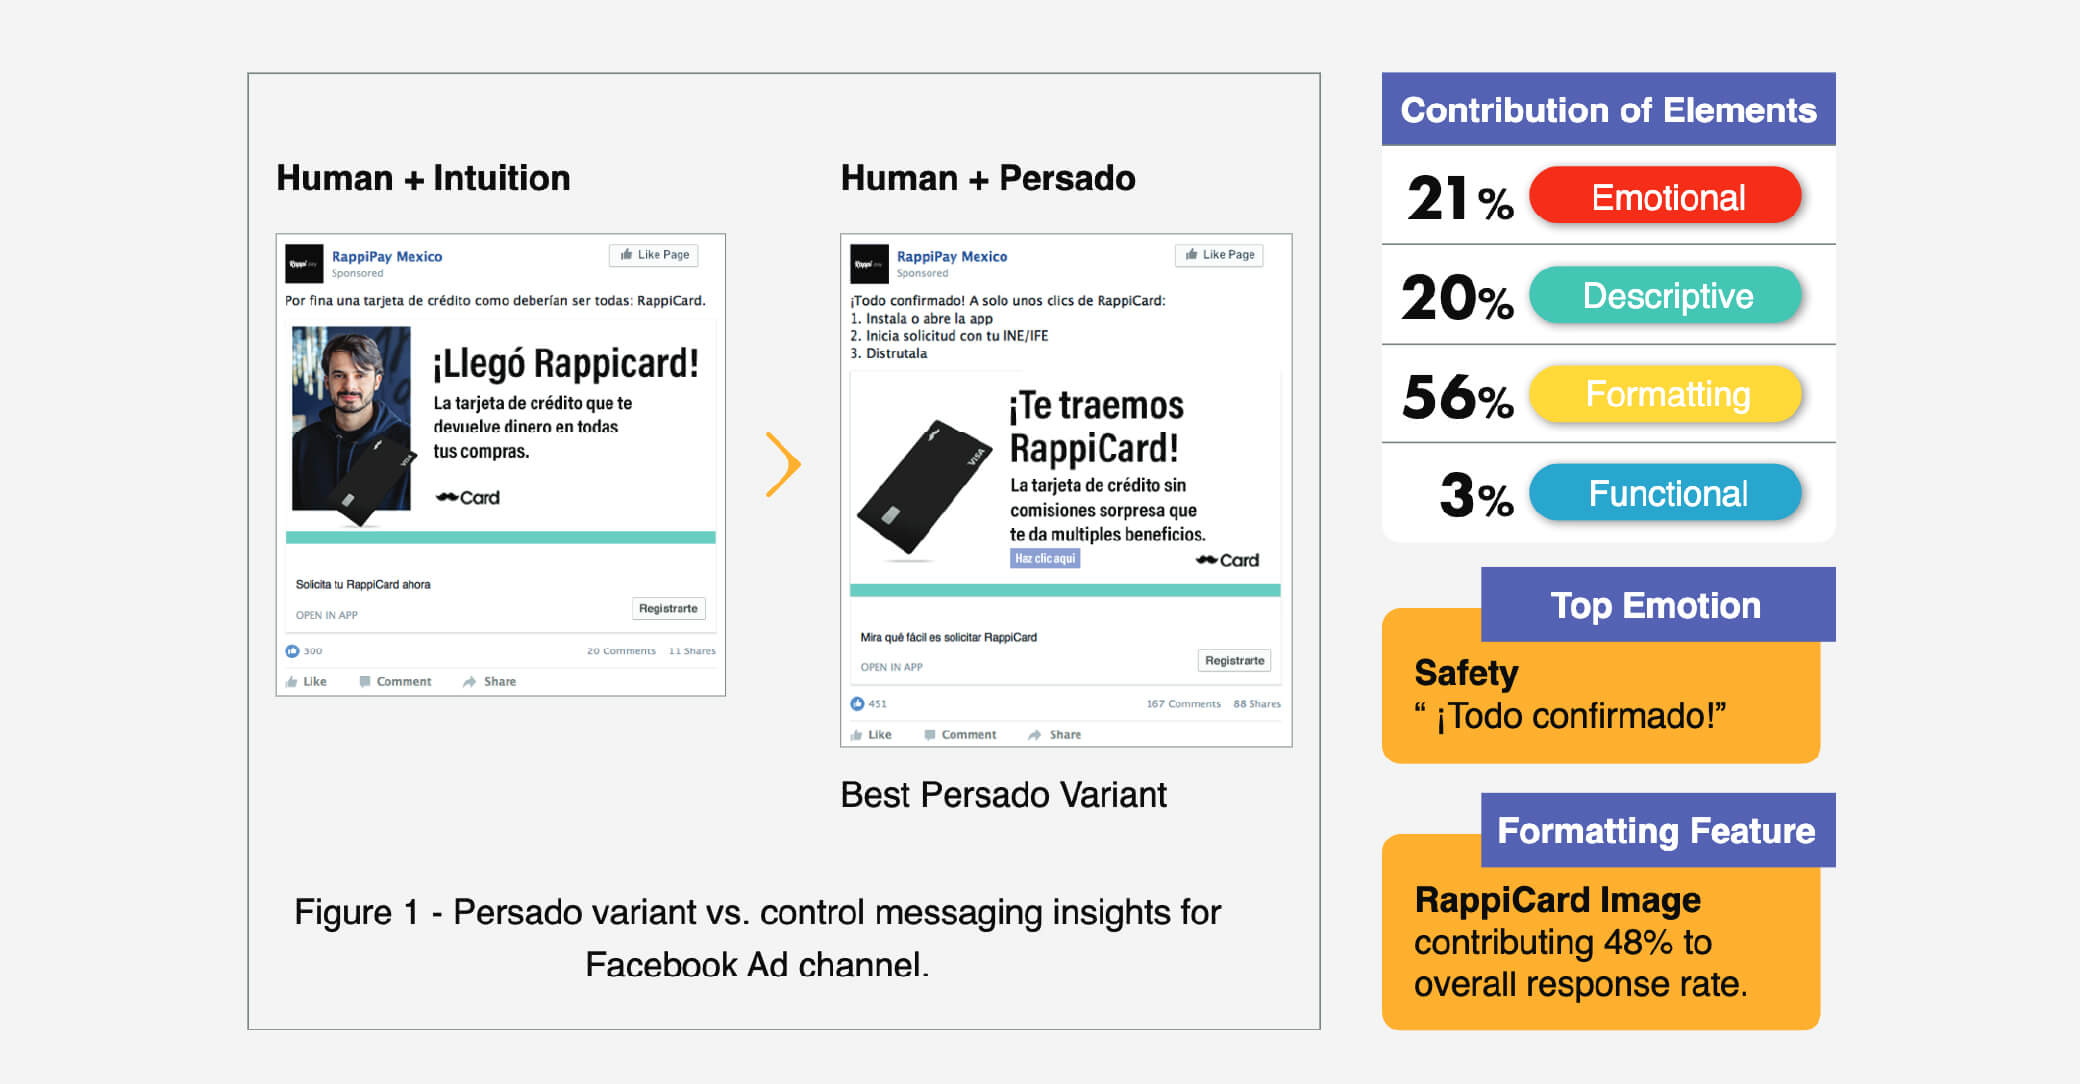 RappiCard turned to Persado for hyper personalization at scale